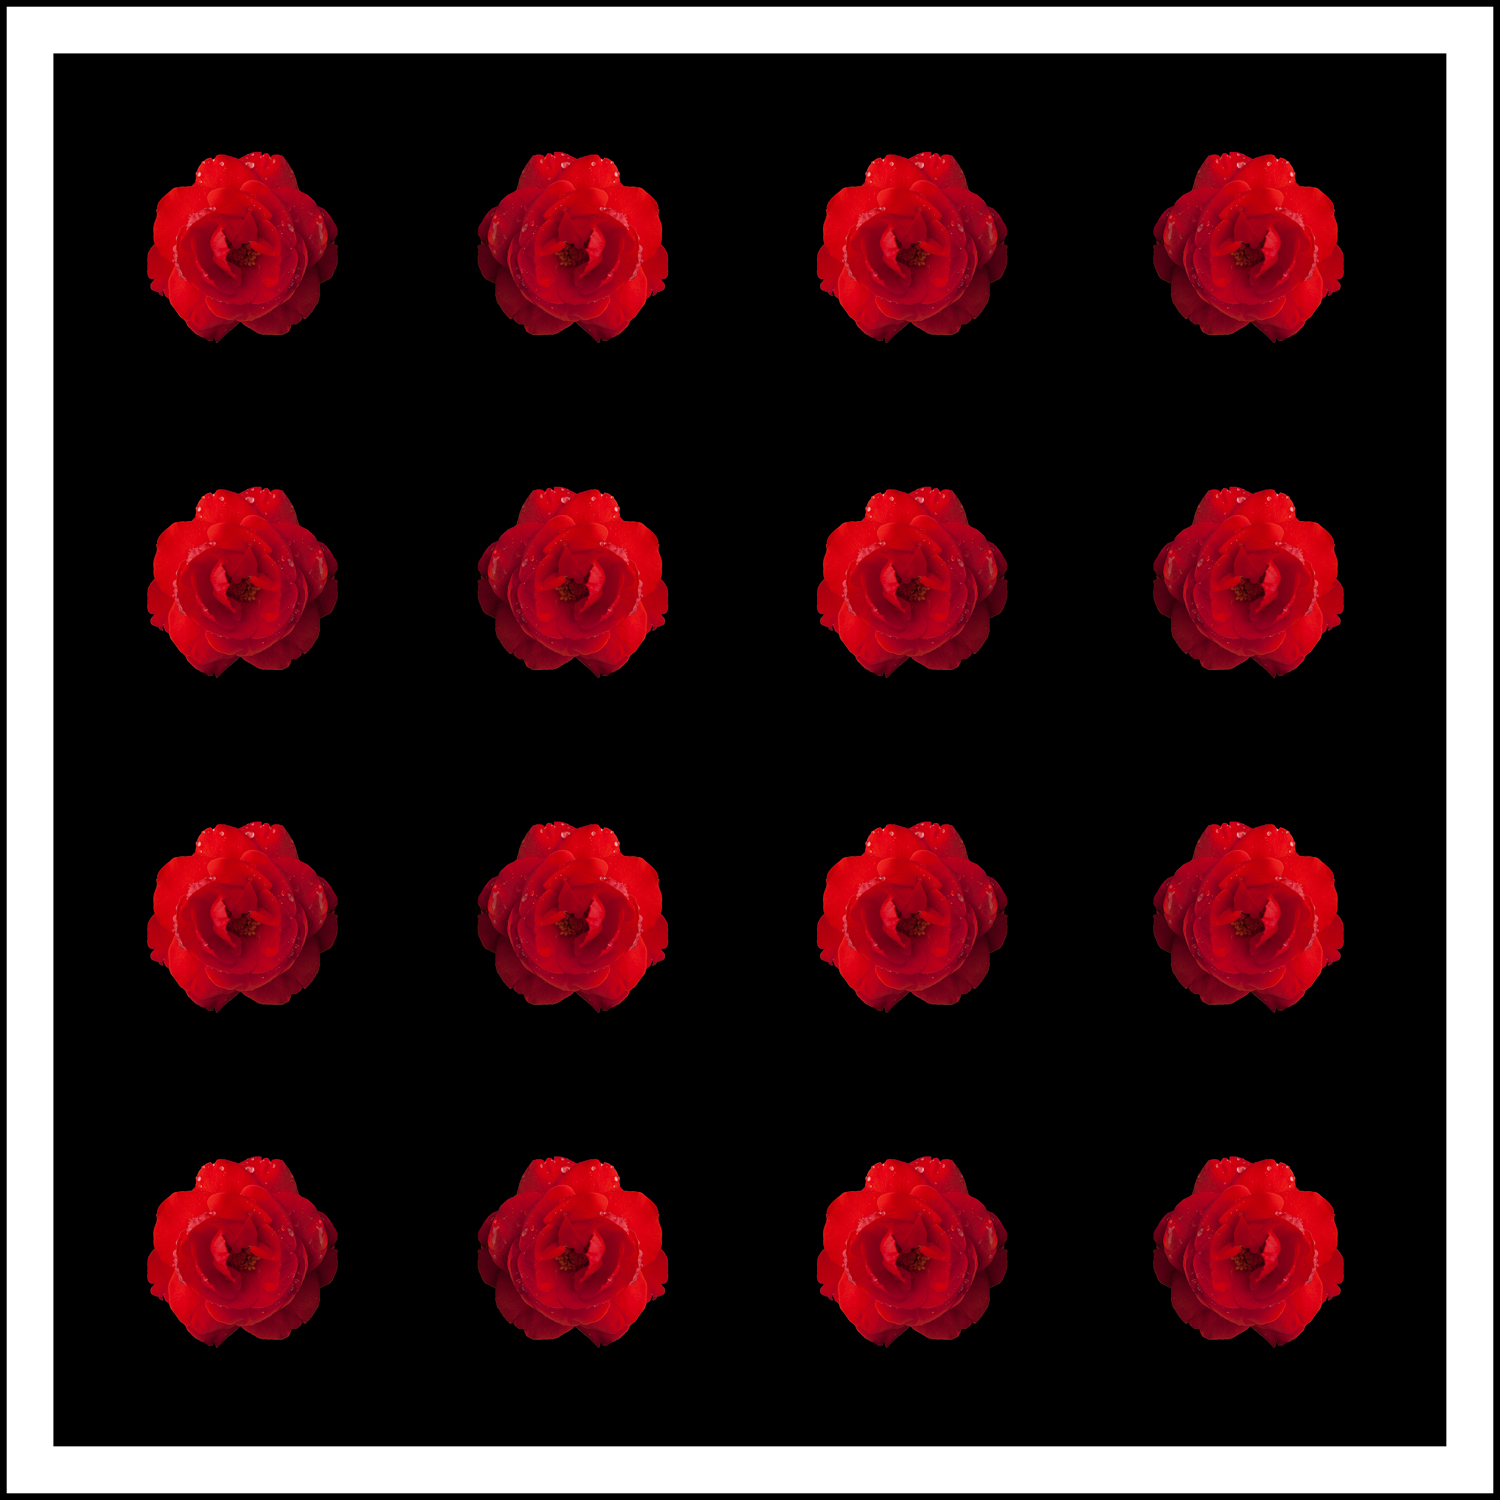 21_Roses_Multible_22